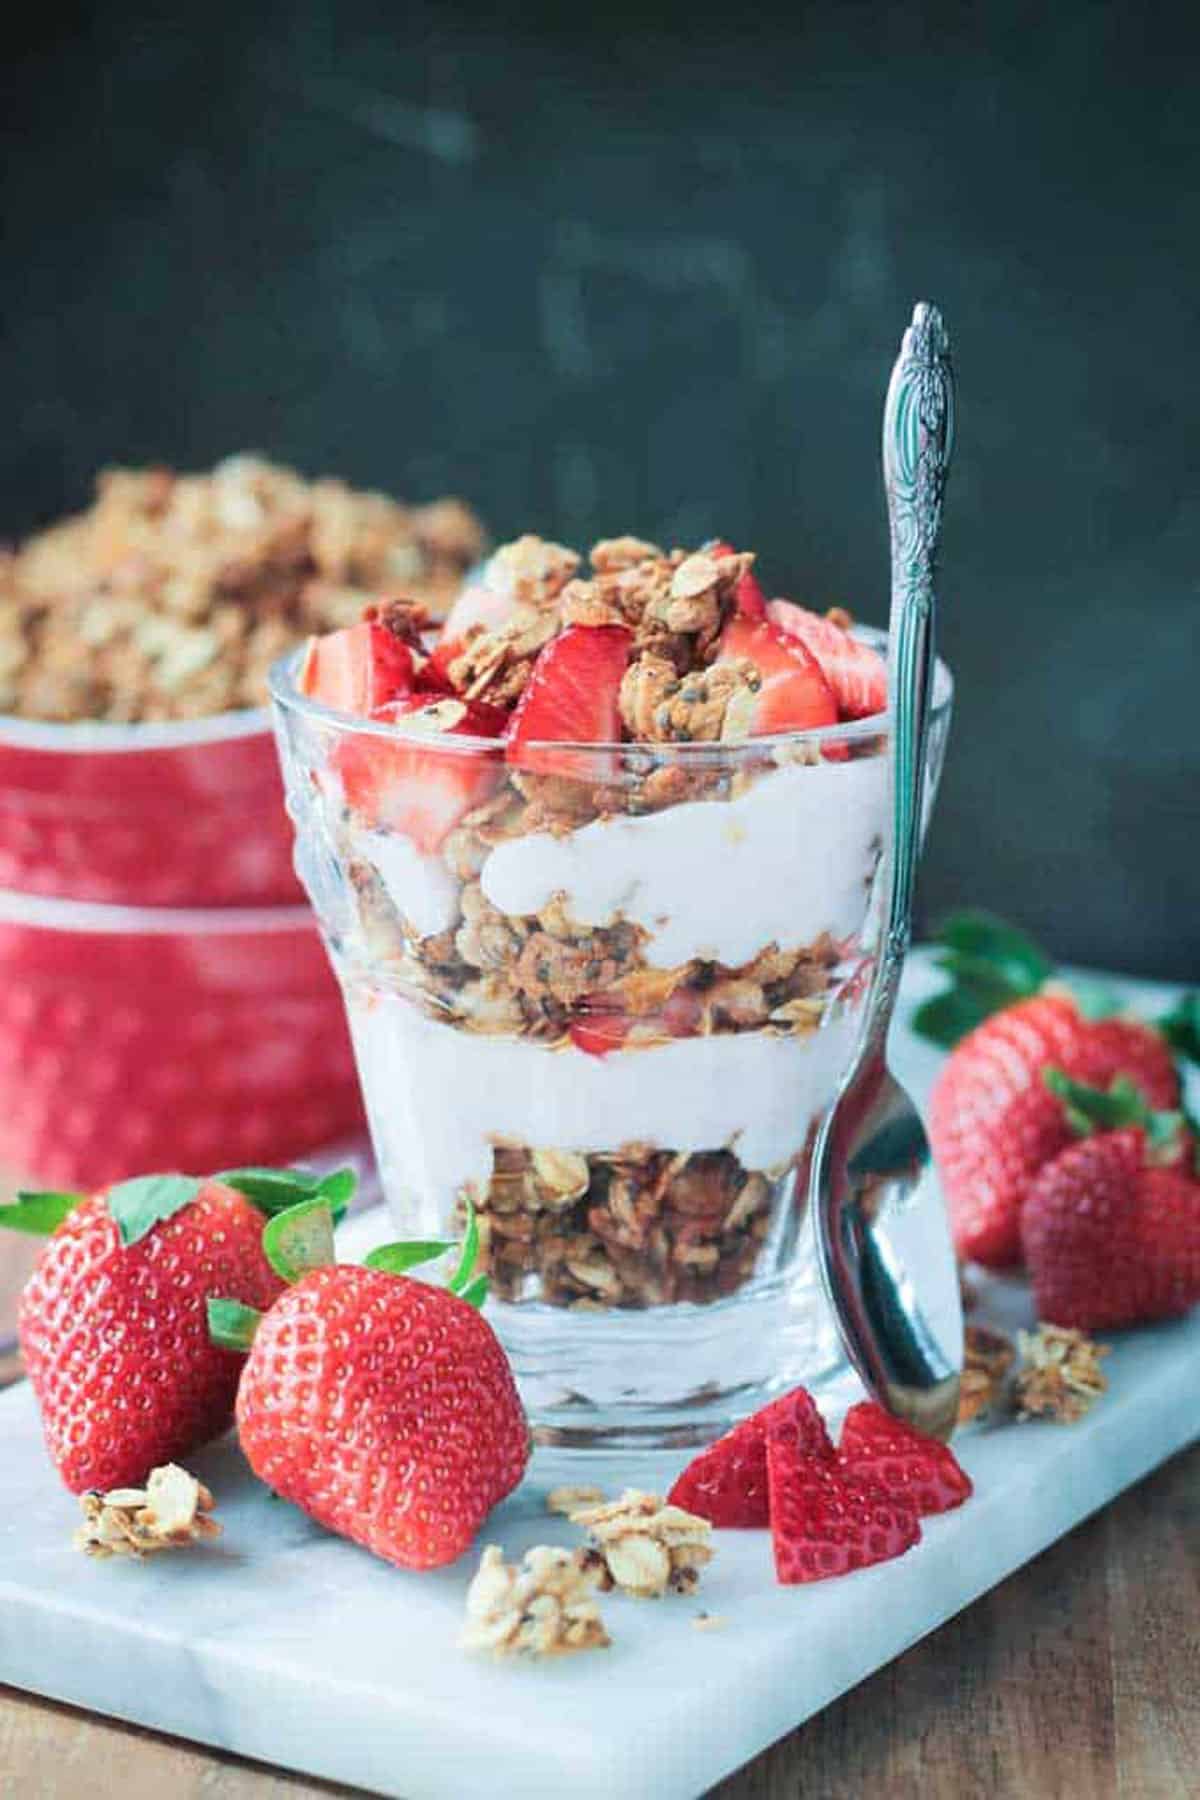 Granola and yogurt layered like a parfait in a glass and topped with fresh strawberries.